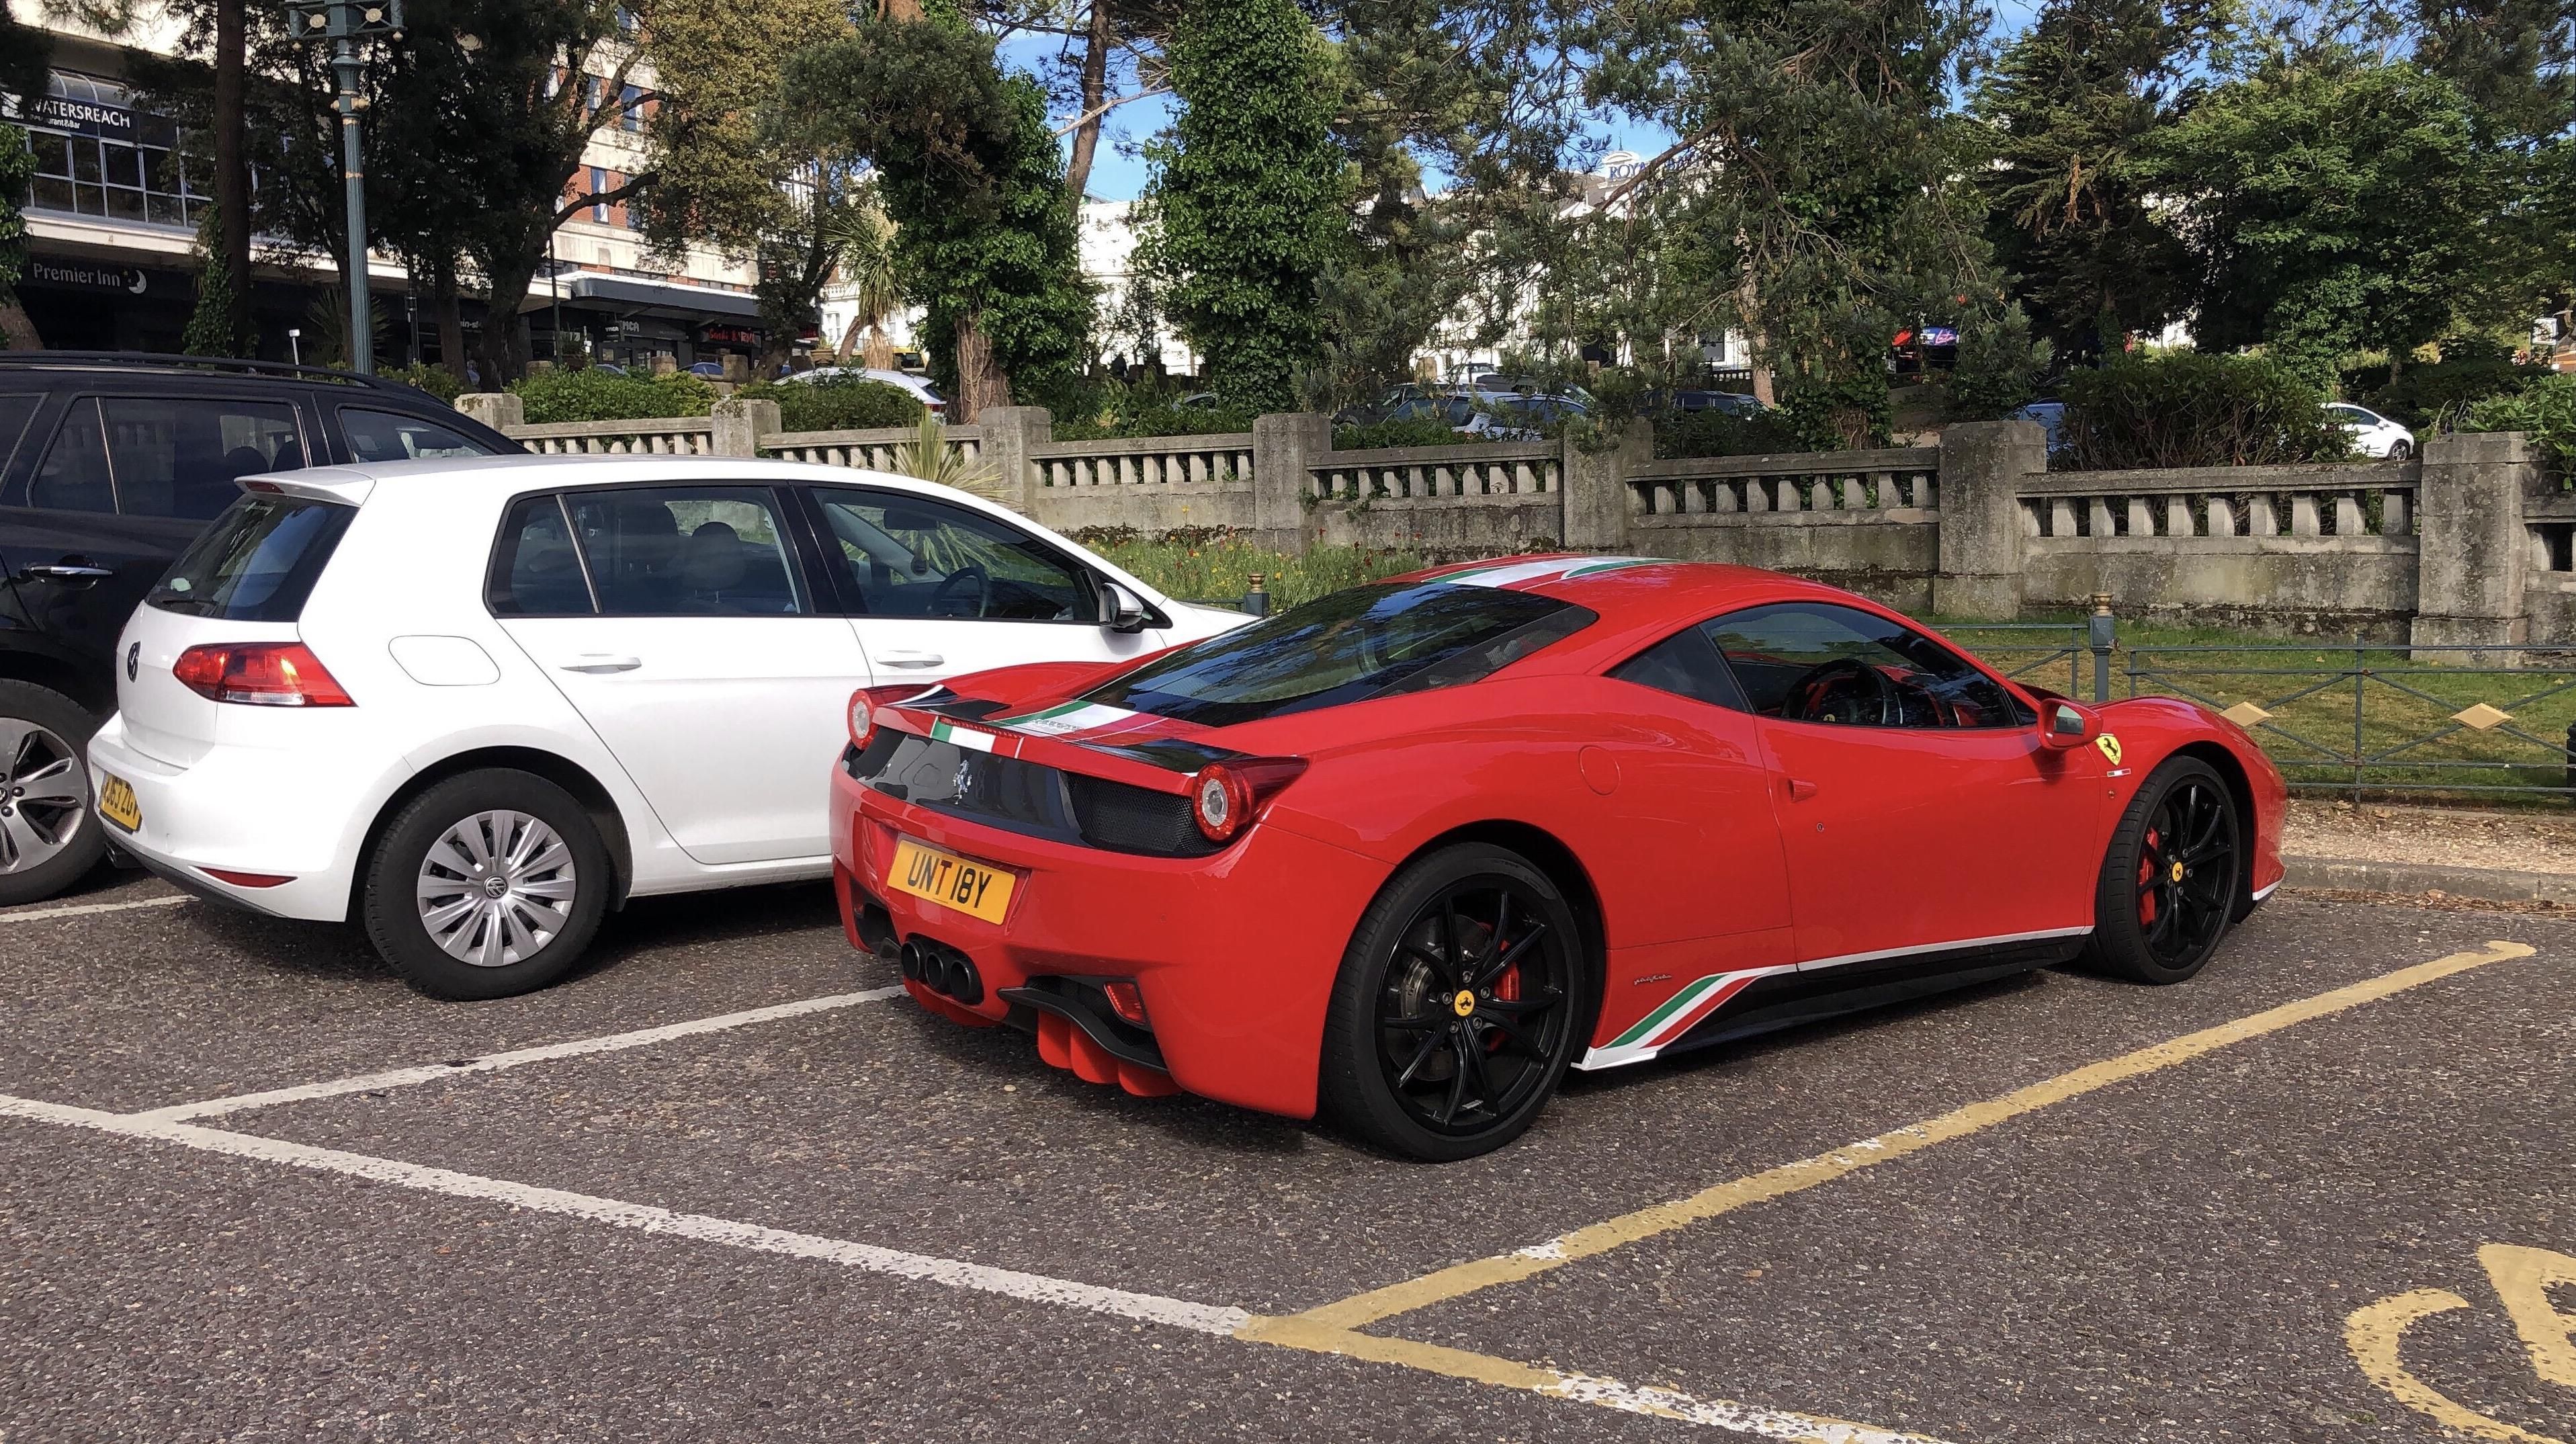 This is my car which I am very proud of. I parked it next to a Ferrari today.